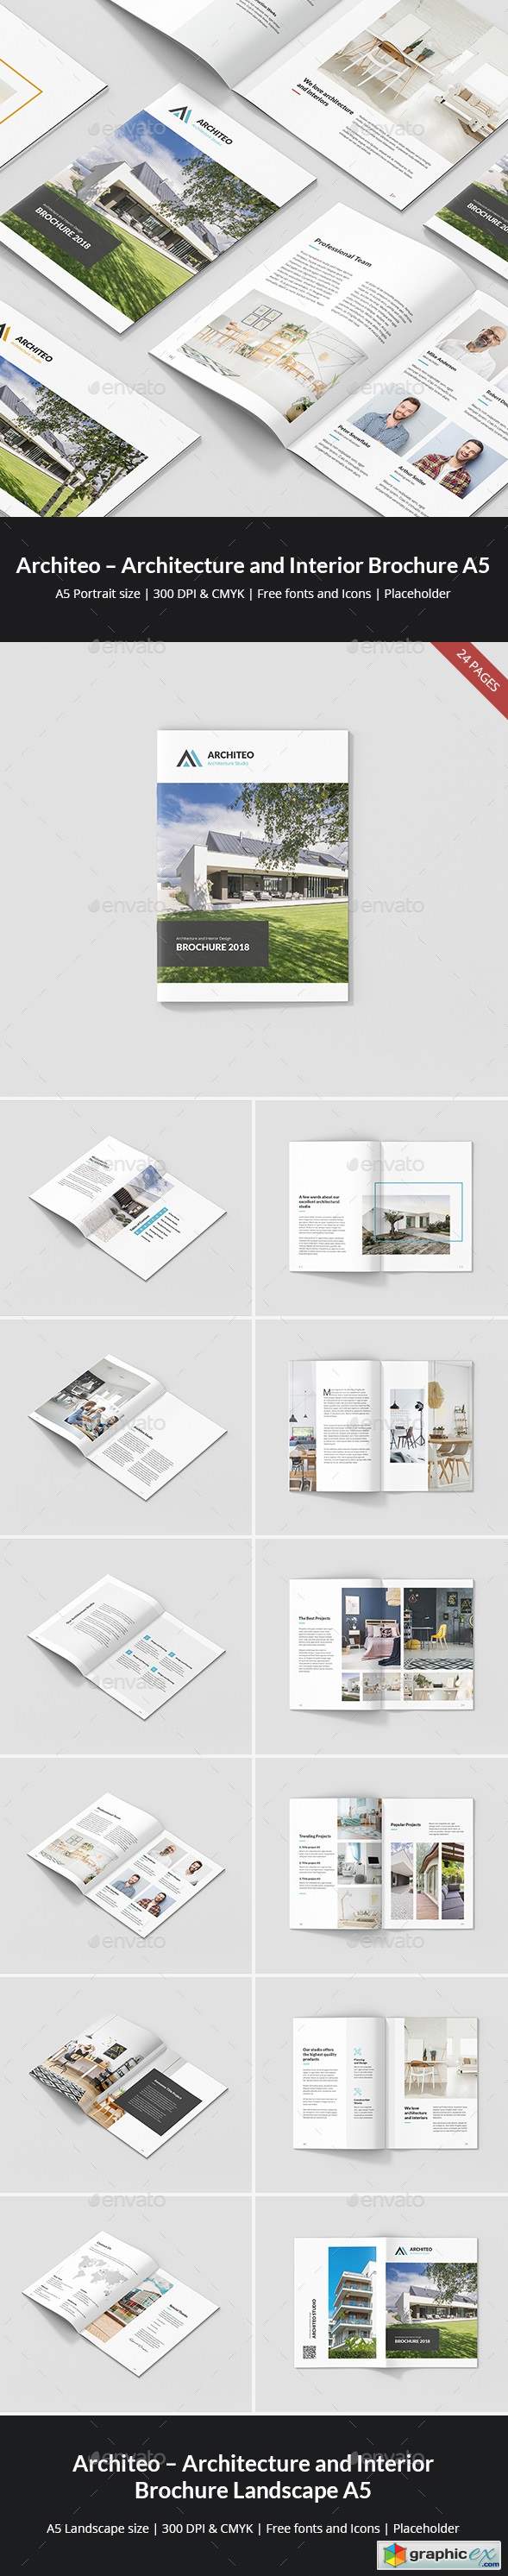 Architeo – Architecture and Interior Brochures Bundle Print Templates 3 in 1